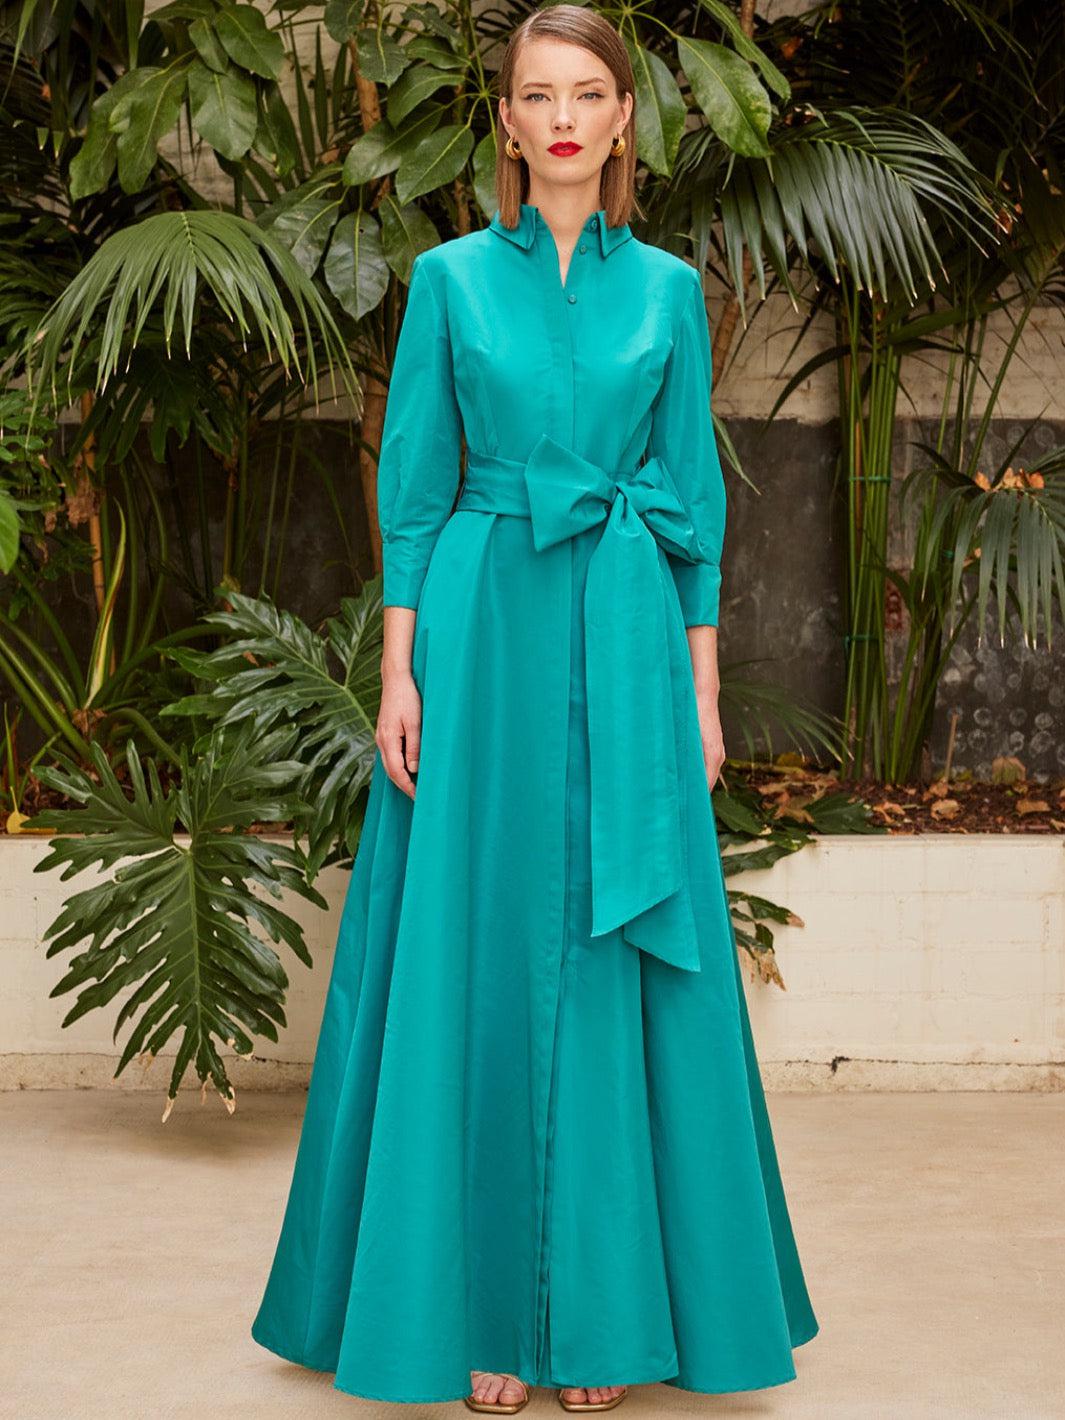 Carla Ruiz Dress 50563 In Turquoise-Occasion Wear-Guest of the wedding-Nicola Ross